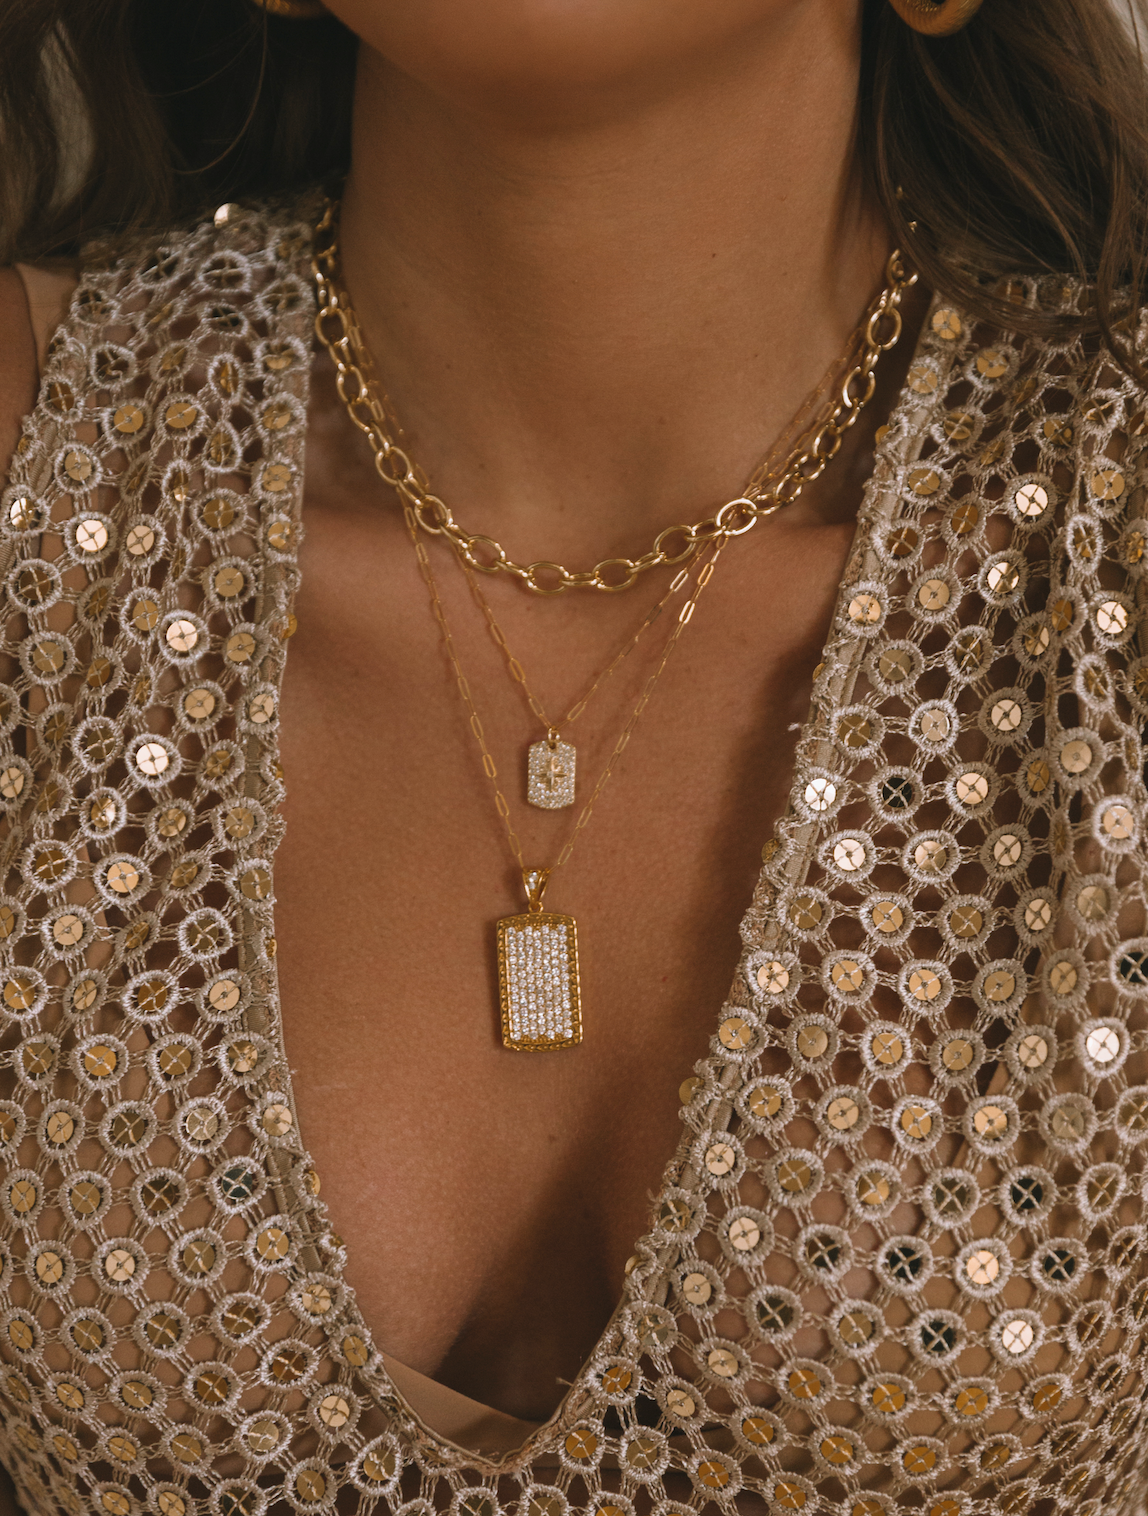 The Boss Necklace